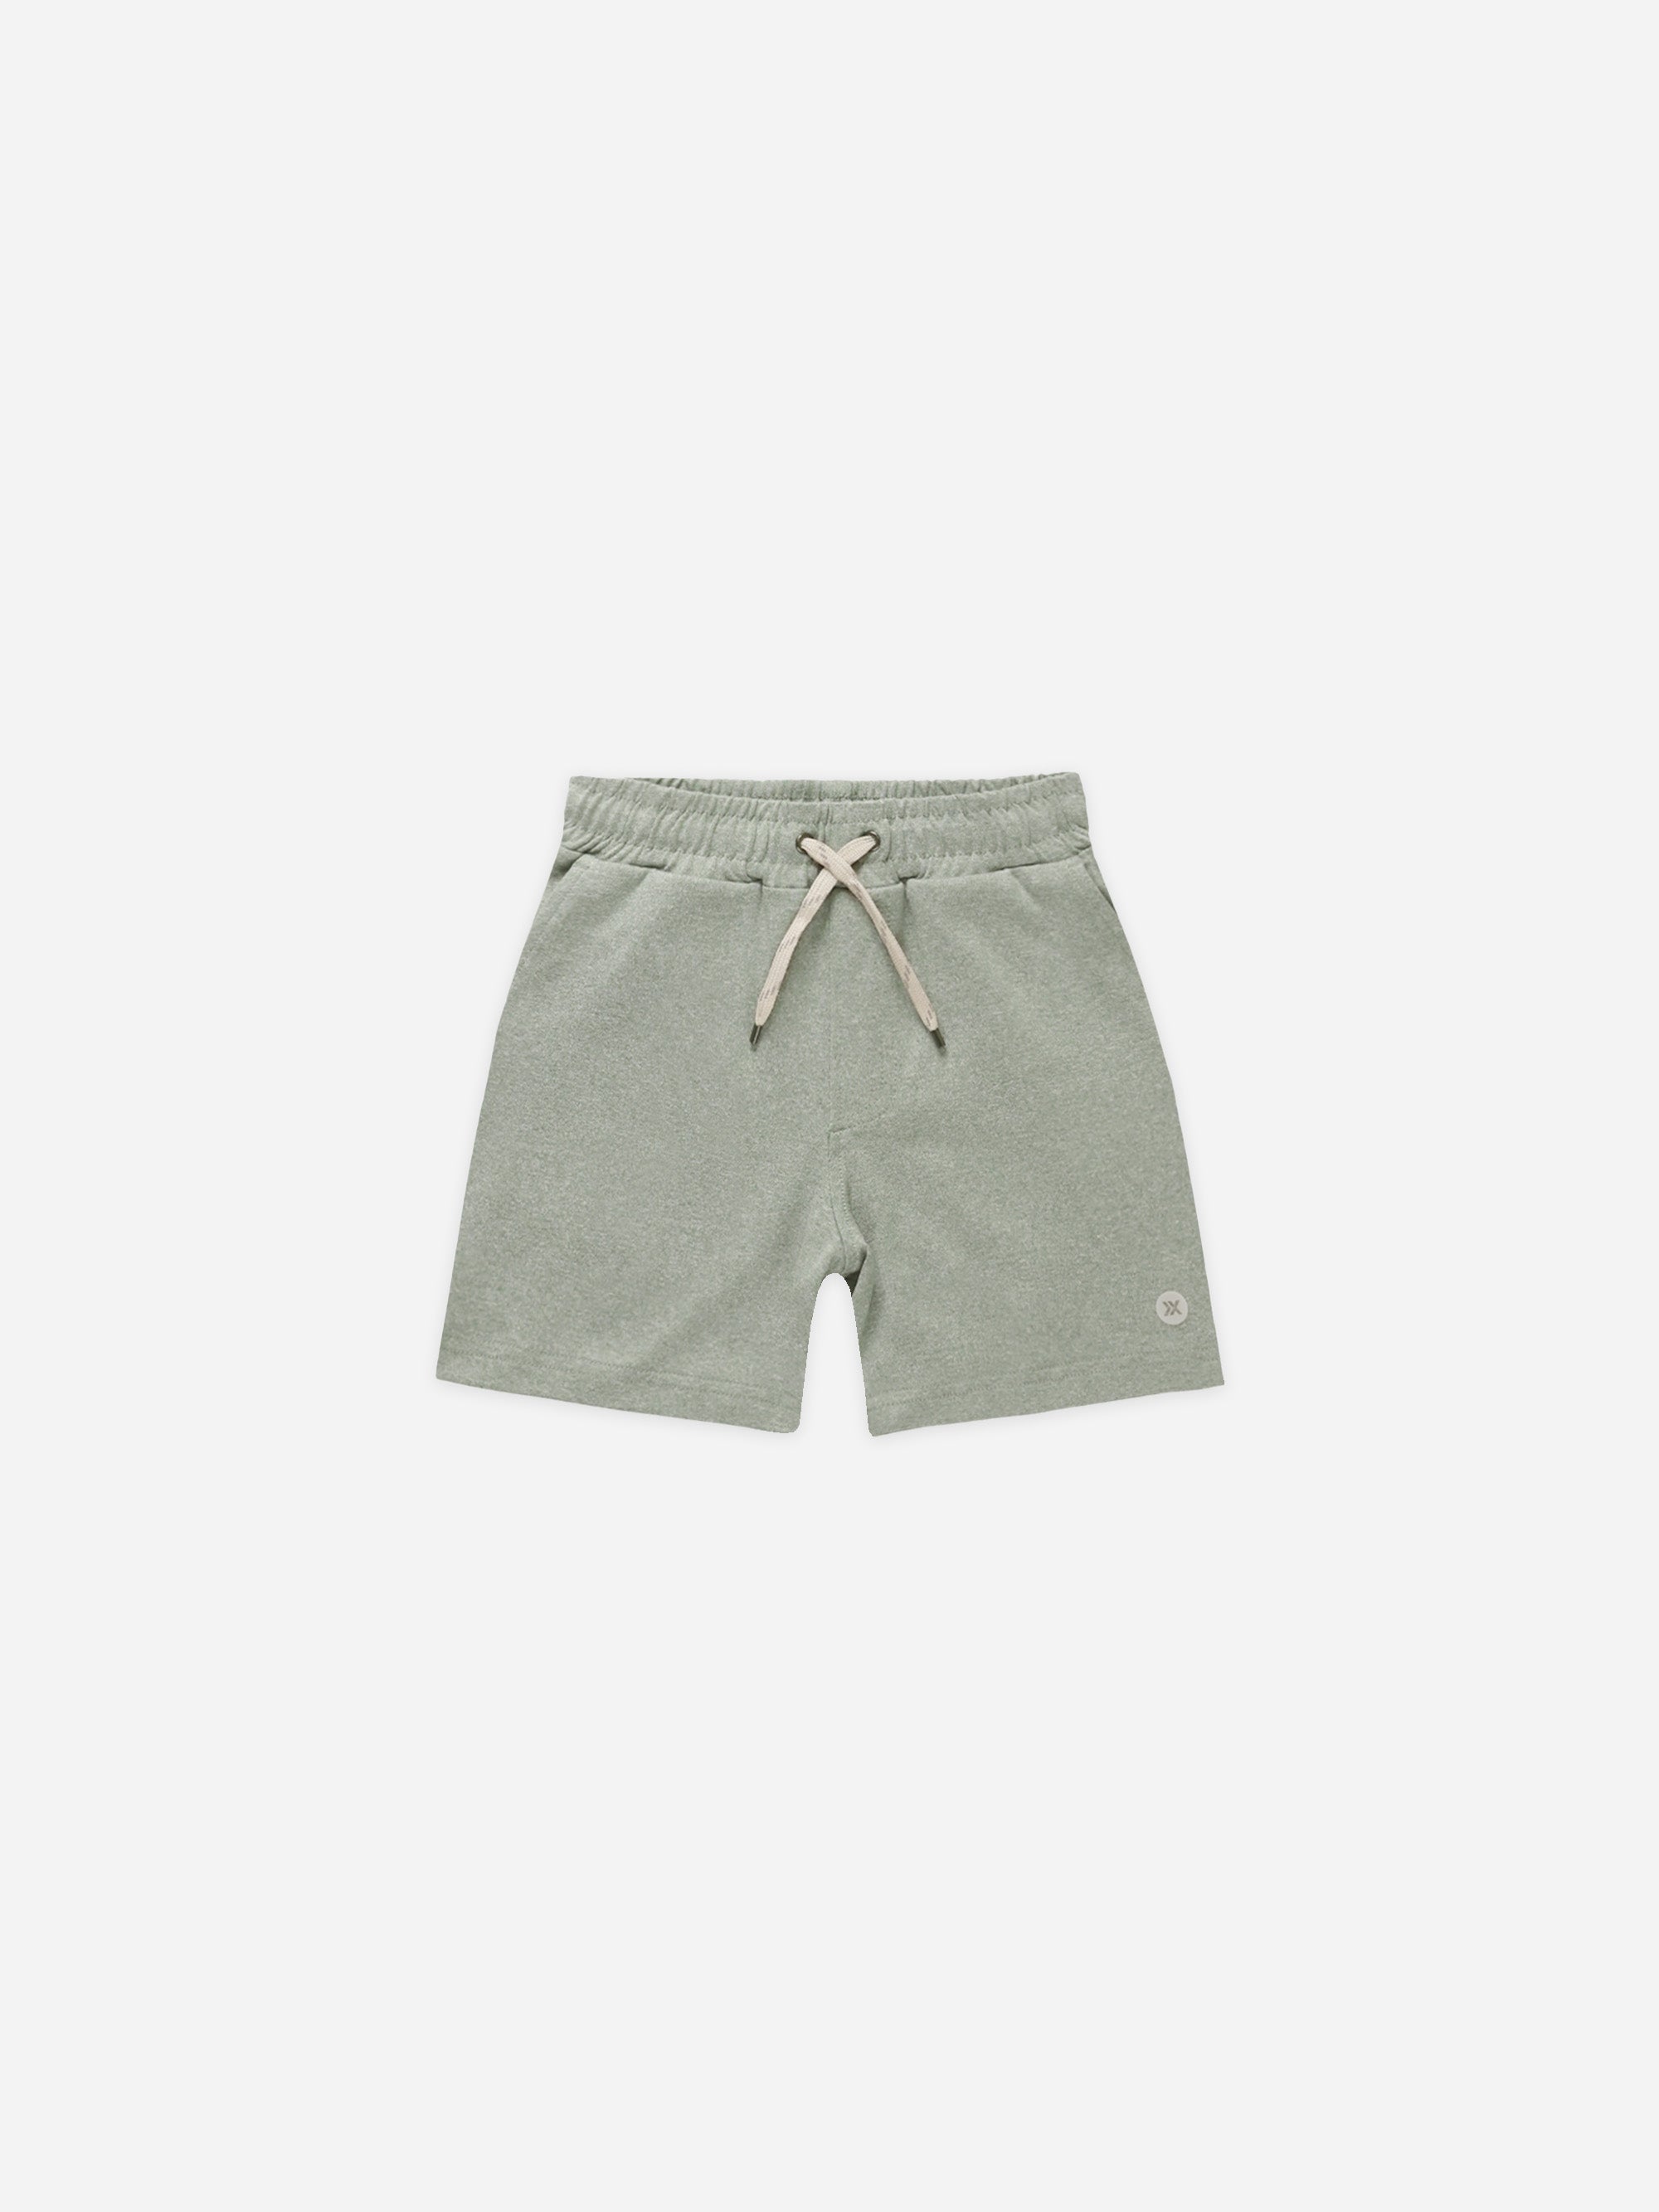 Oceanside Tech Short || Heathered Aqua - Rylee + Cru | Kids Clothes | Trendy Baby Clothes | Modern Infant Outfits |